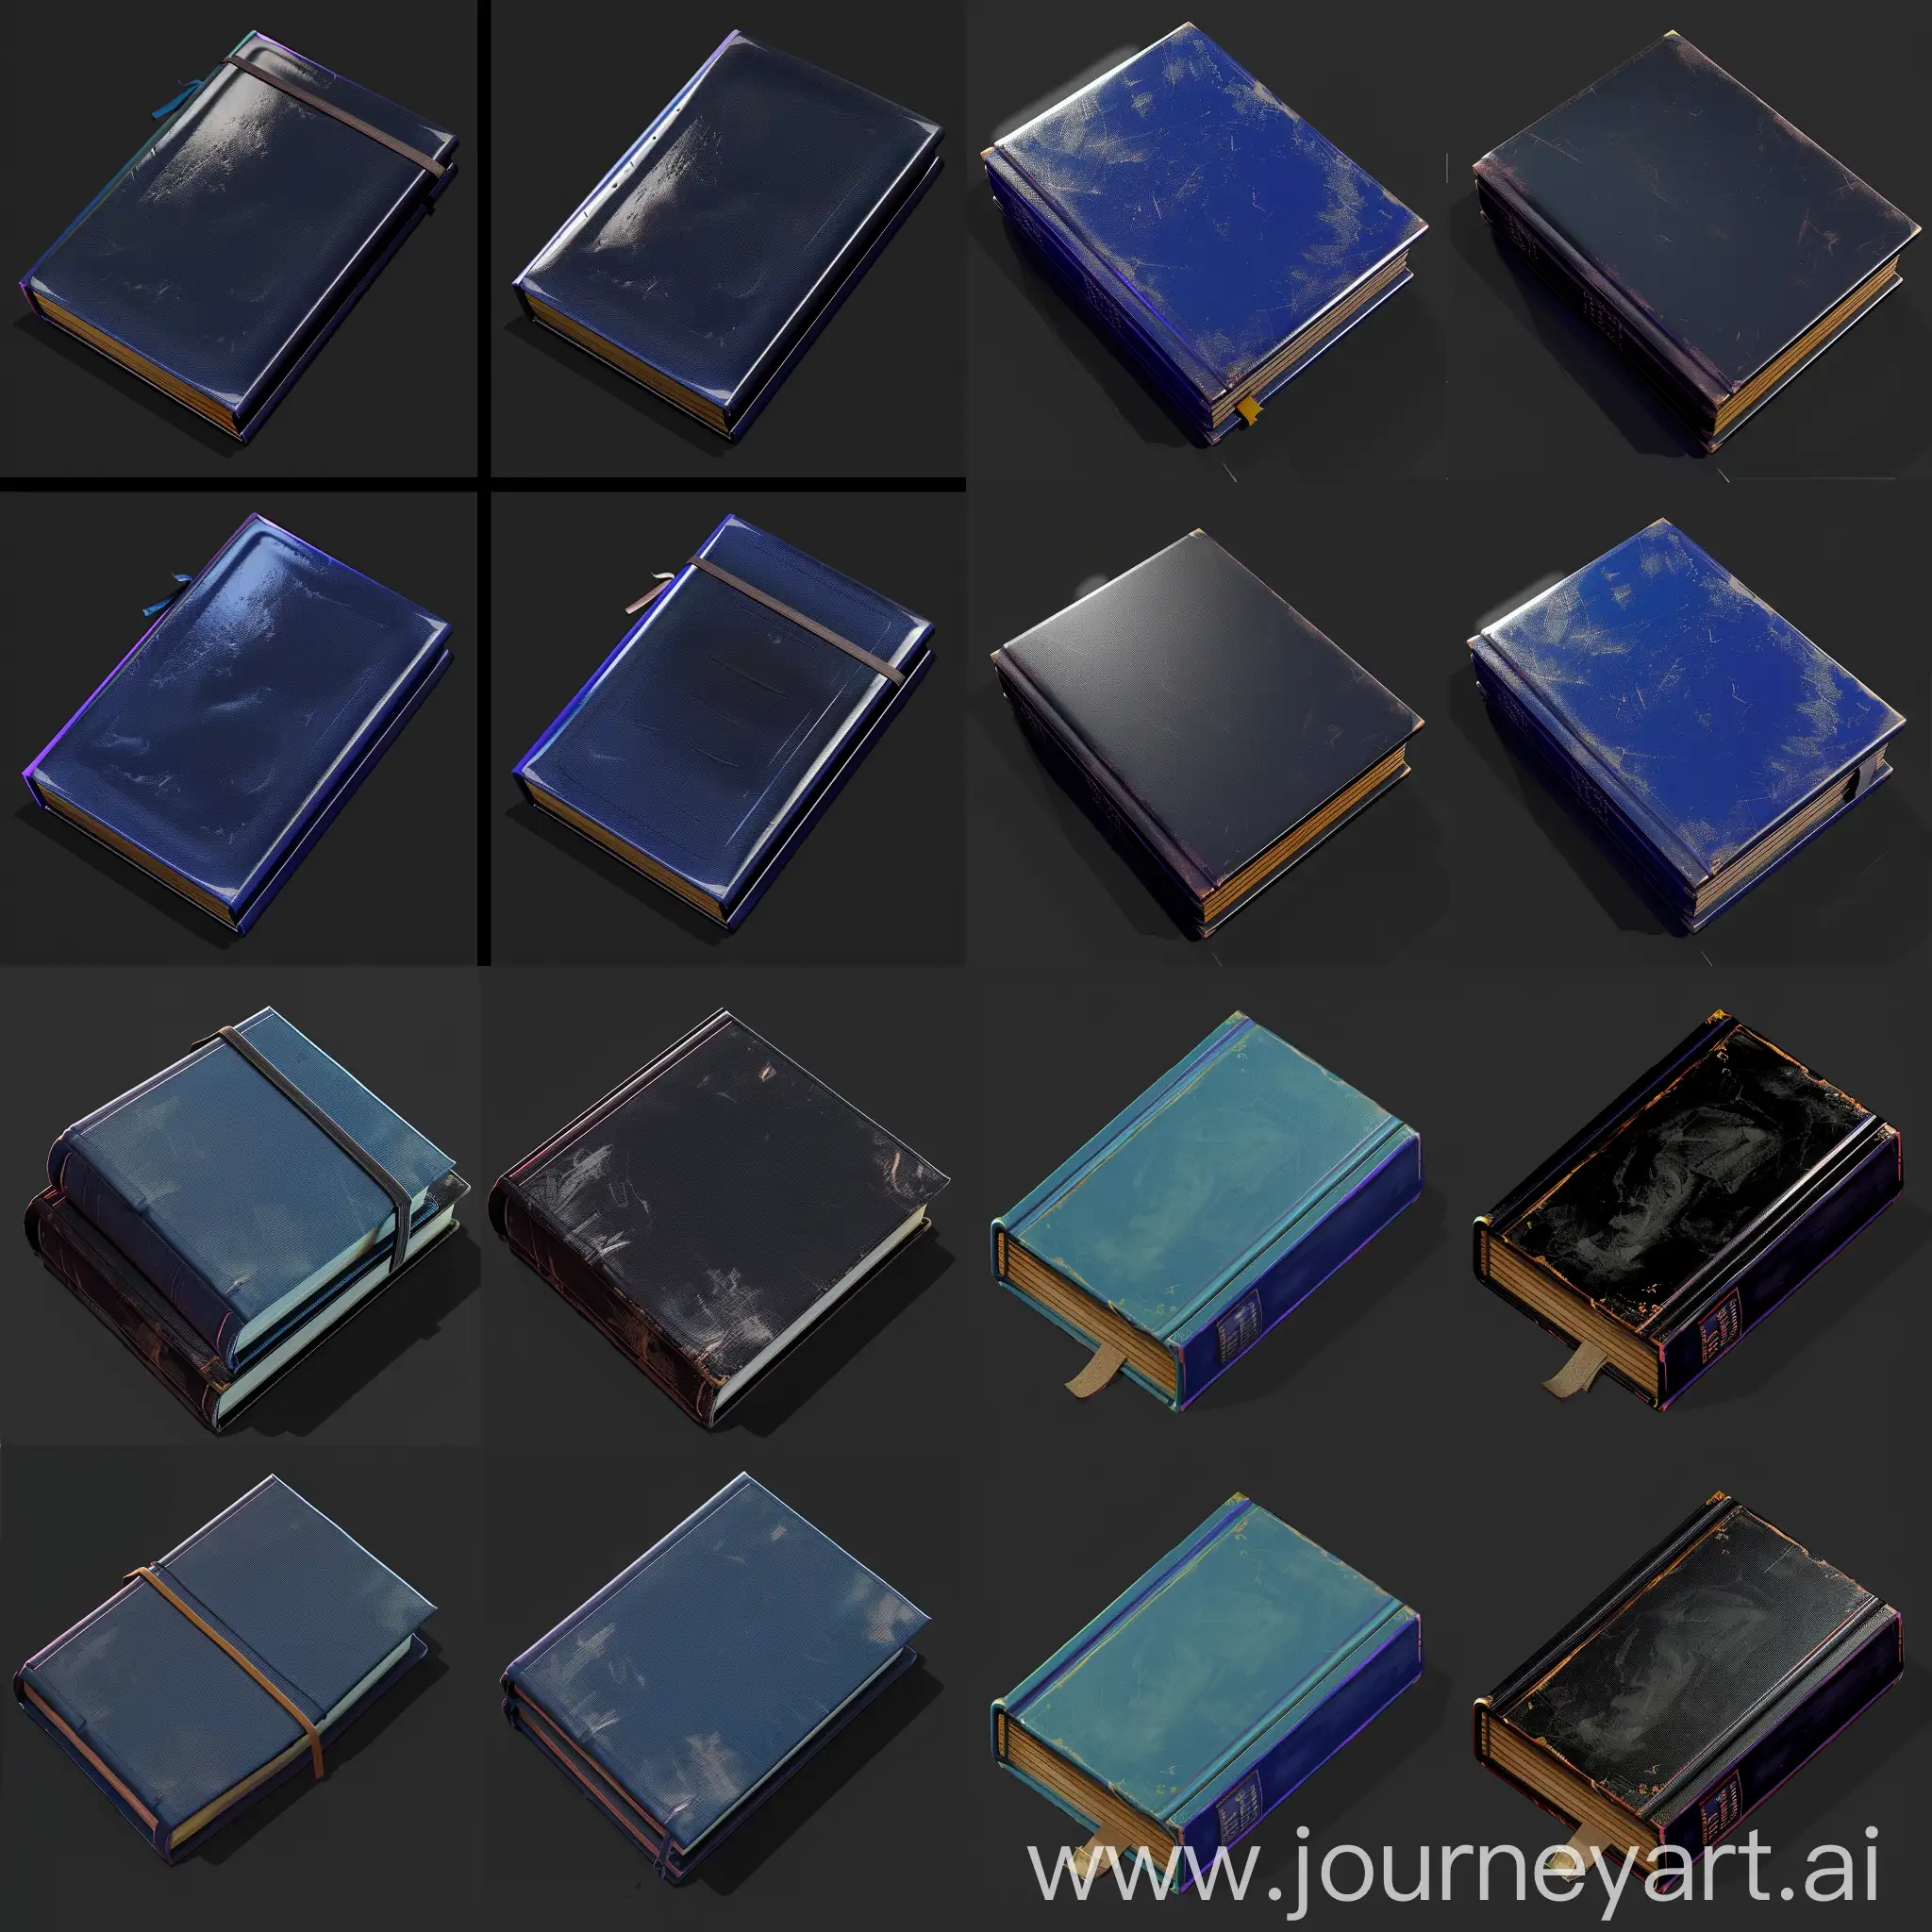 https://i.imgur.com/yfwPSIw.png https://i.imgur.com/Q8xDucH.png realistic photo of isometric set, very thin smooth blue textbooks on black background, style of unreal engine 3d render, ultrarealistic style, shiny, leather cover, isometric set, spritesheet --style raw --stylize 50 --iw 1.5 --chaos 15